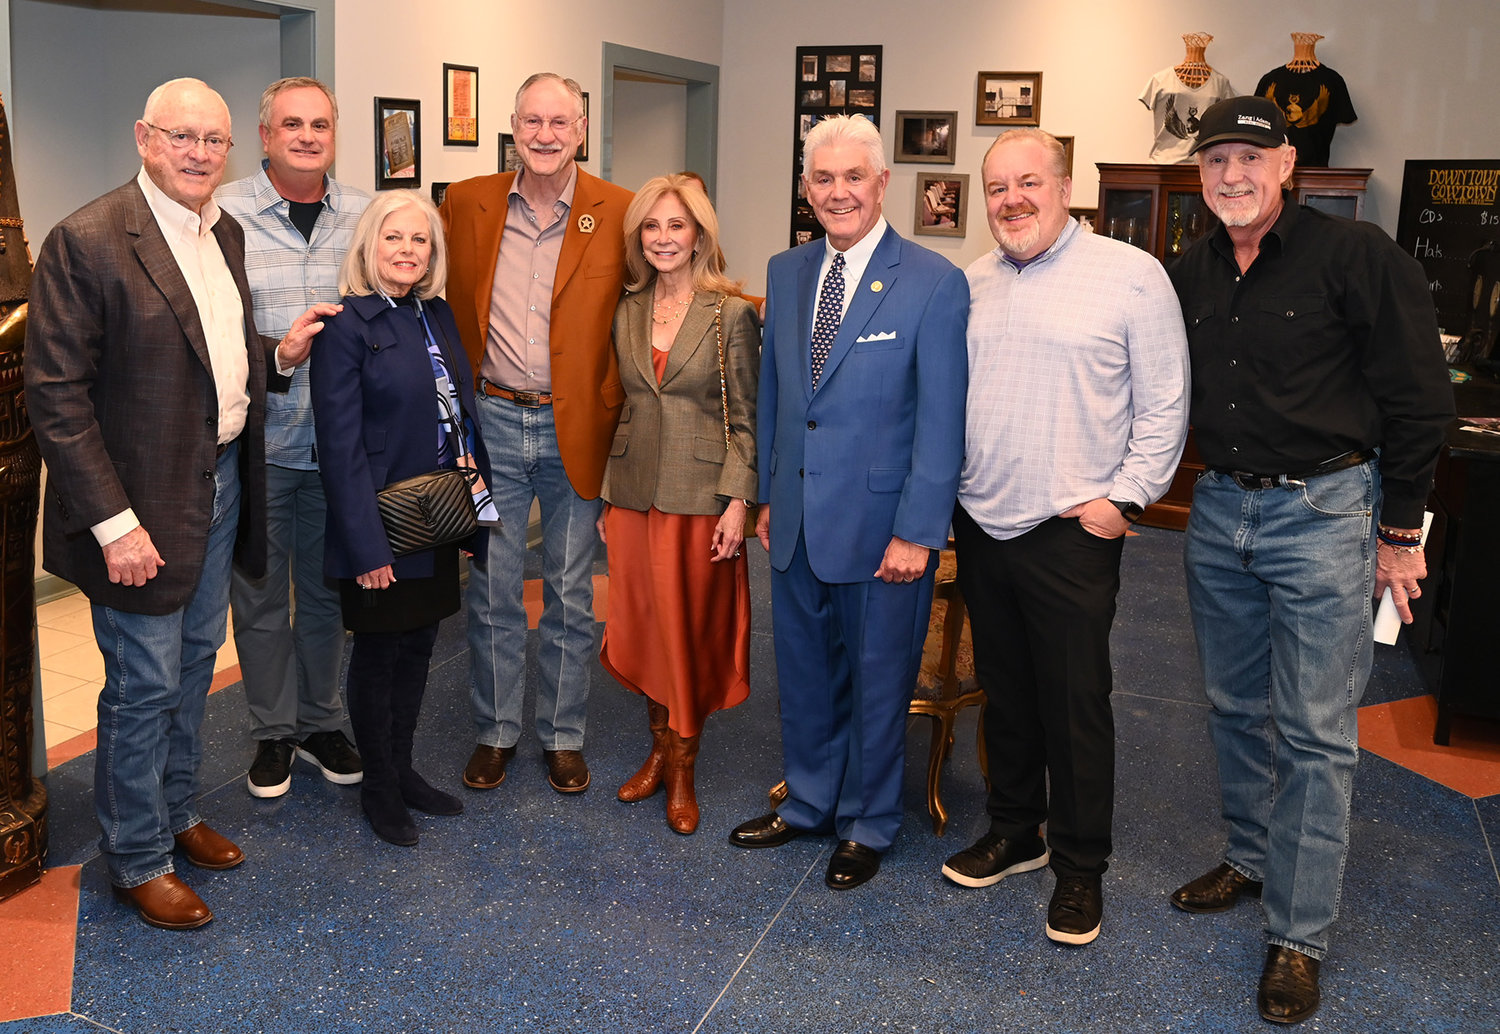 Present at Randy Galloway’s 80th birthday were (from left) Nolan Ryan and his wife Ruth Holdorff, TCU Head Football Coach Sonny Dykes, Mike and Rosie Moncrief, Congressman Roger Williams, Brian Estridge, and Jamie Adams..